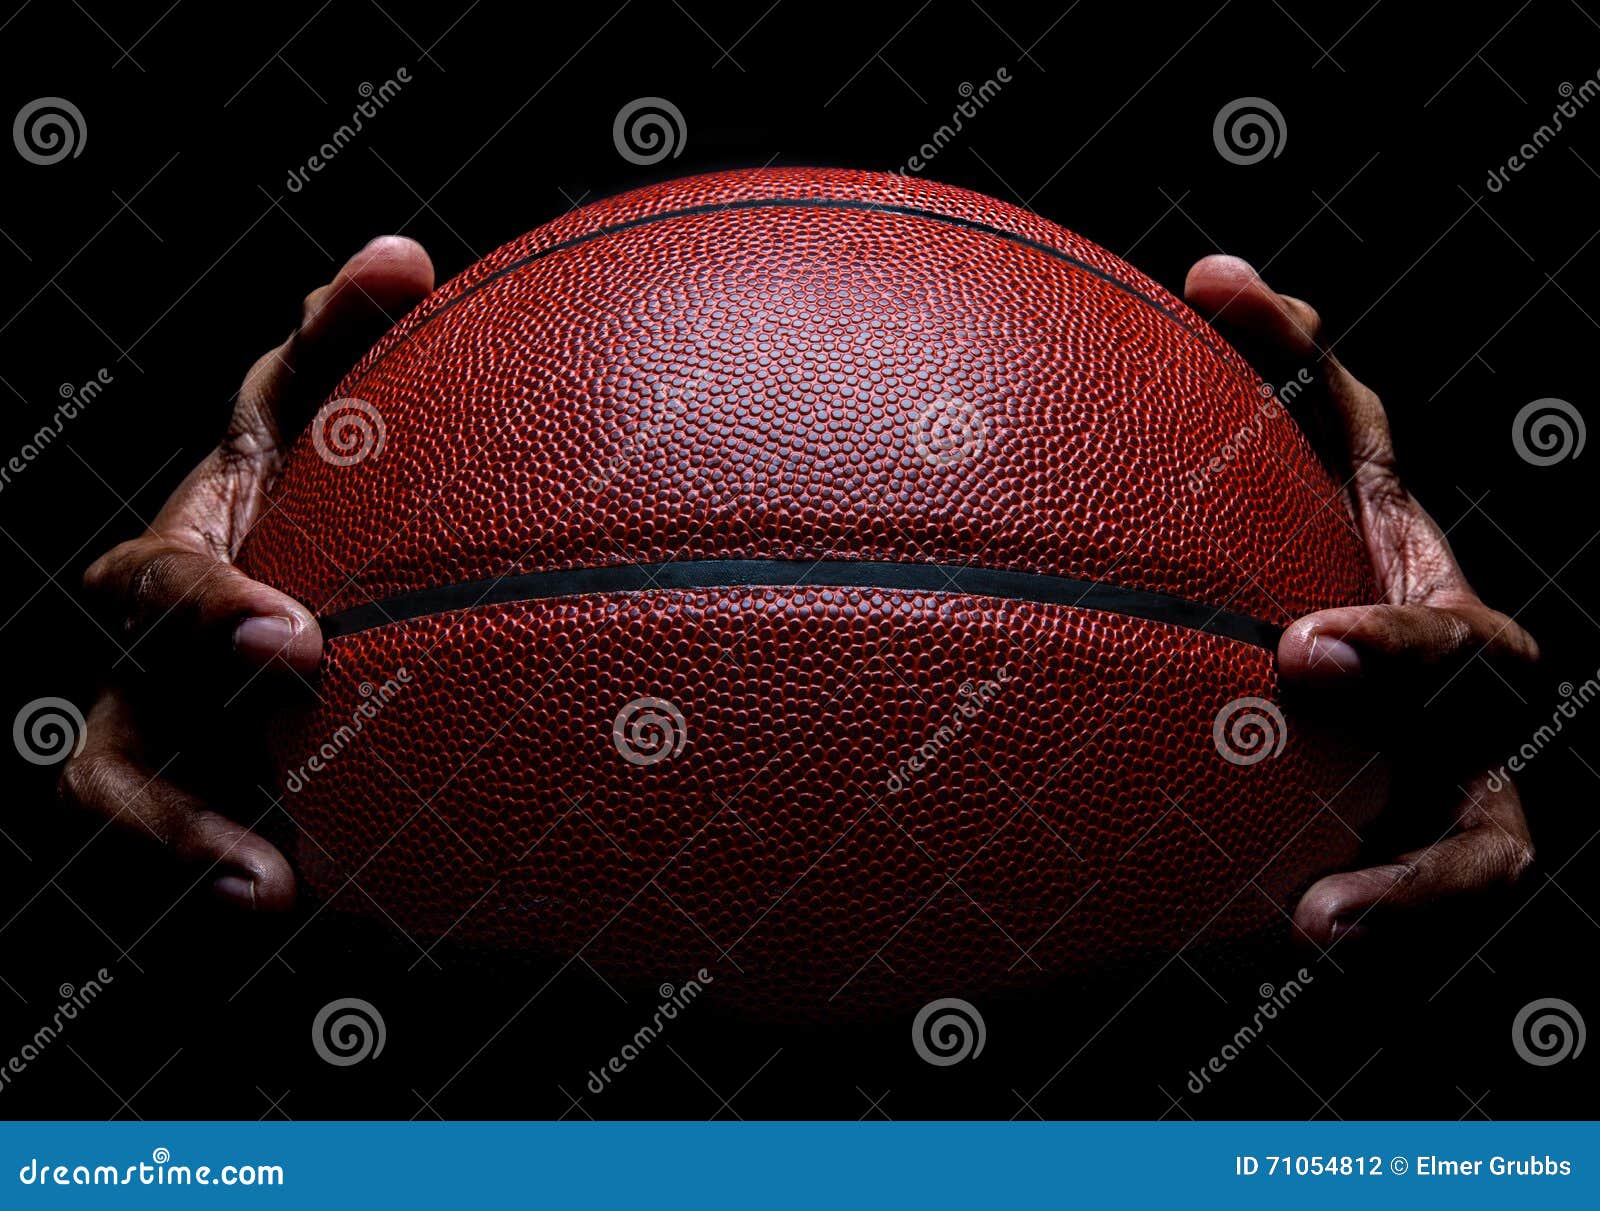 basketball closeup and hand gripping